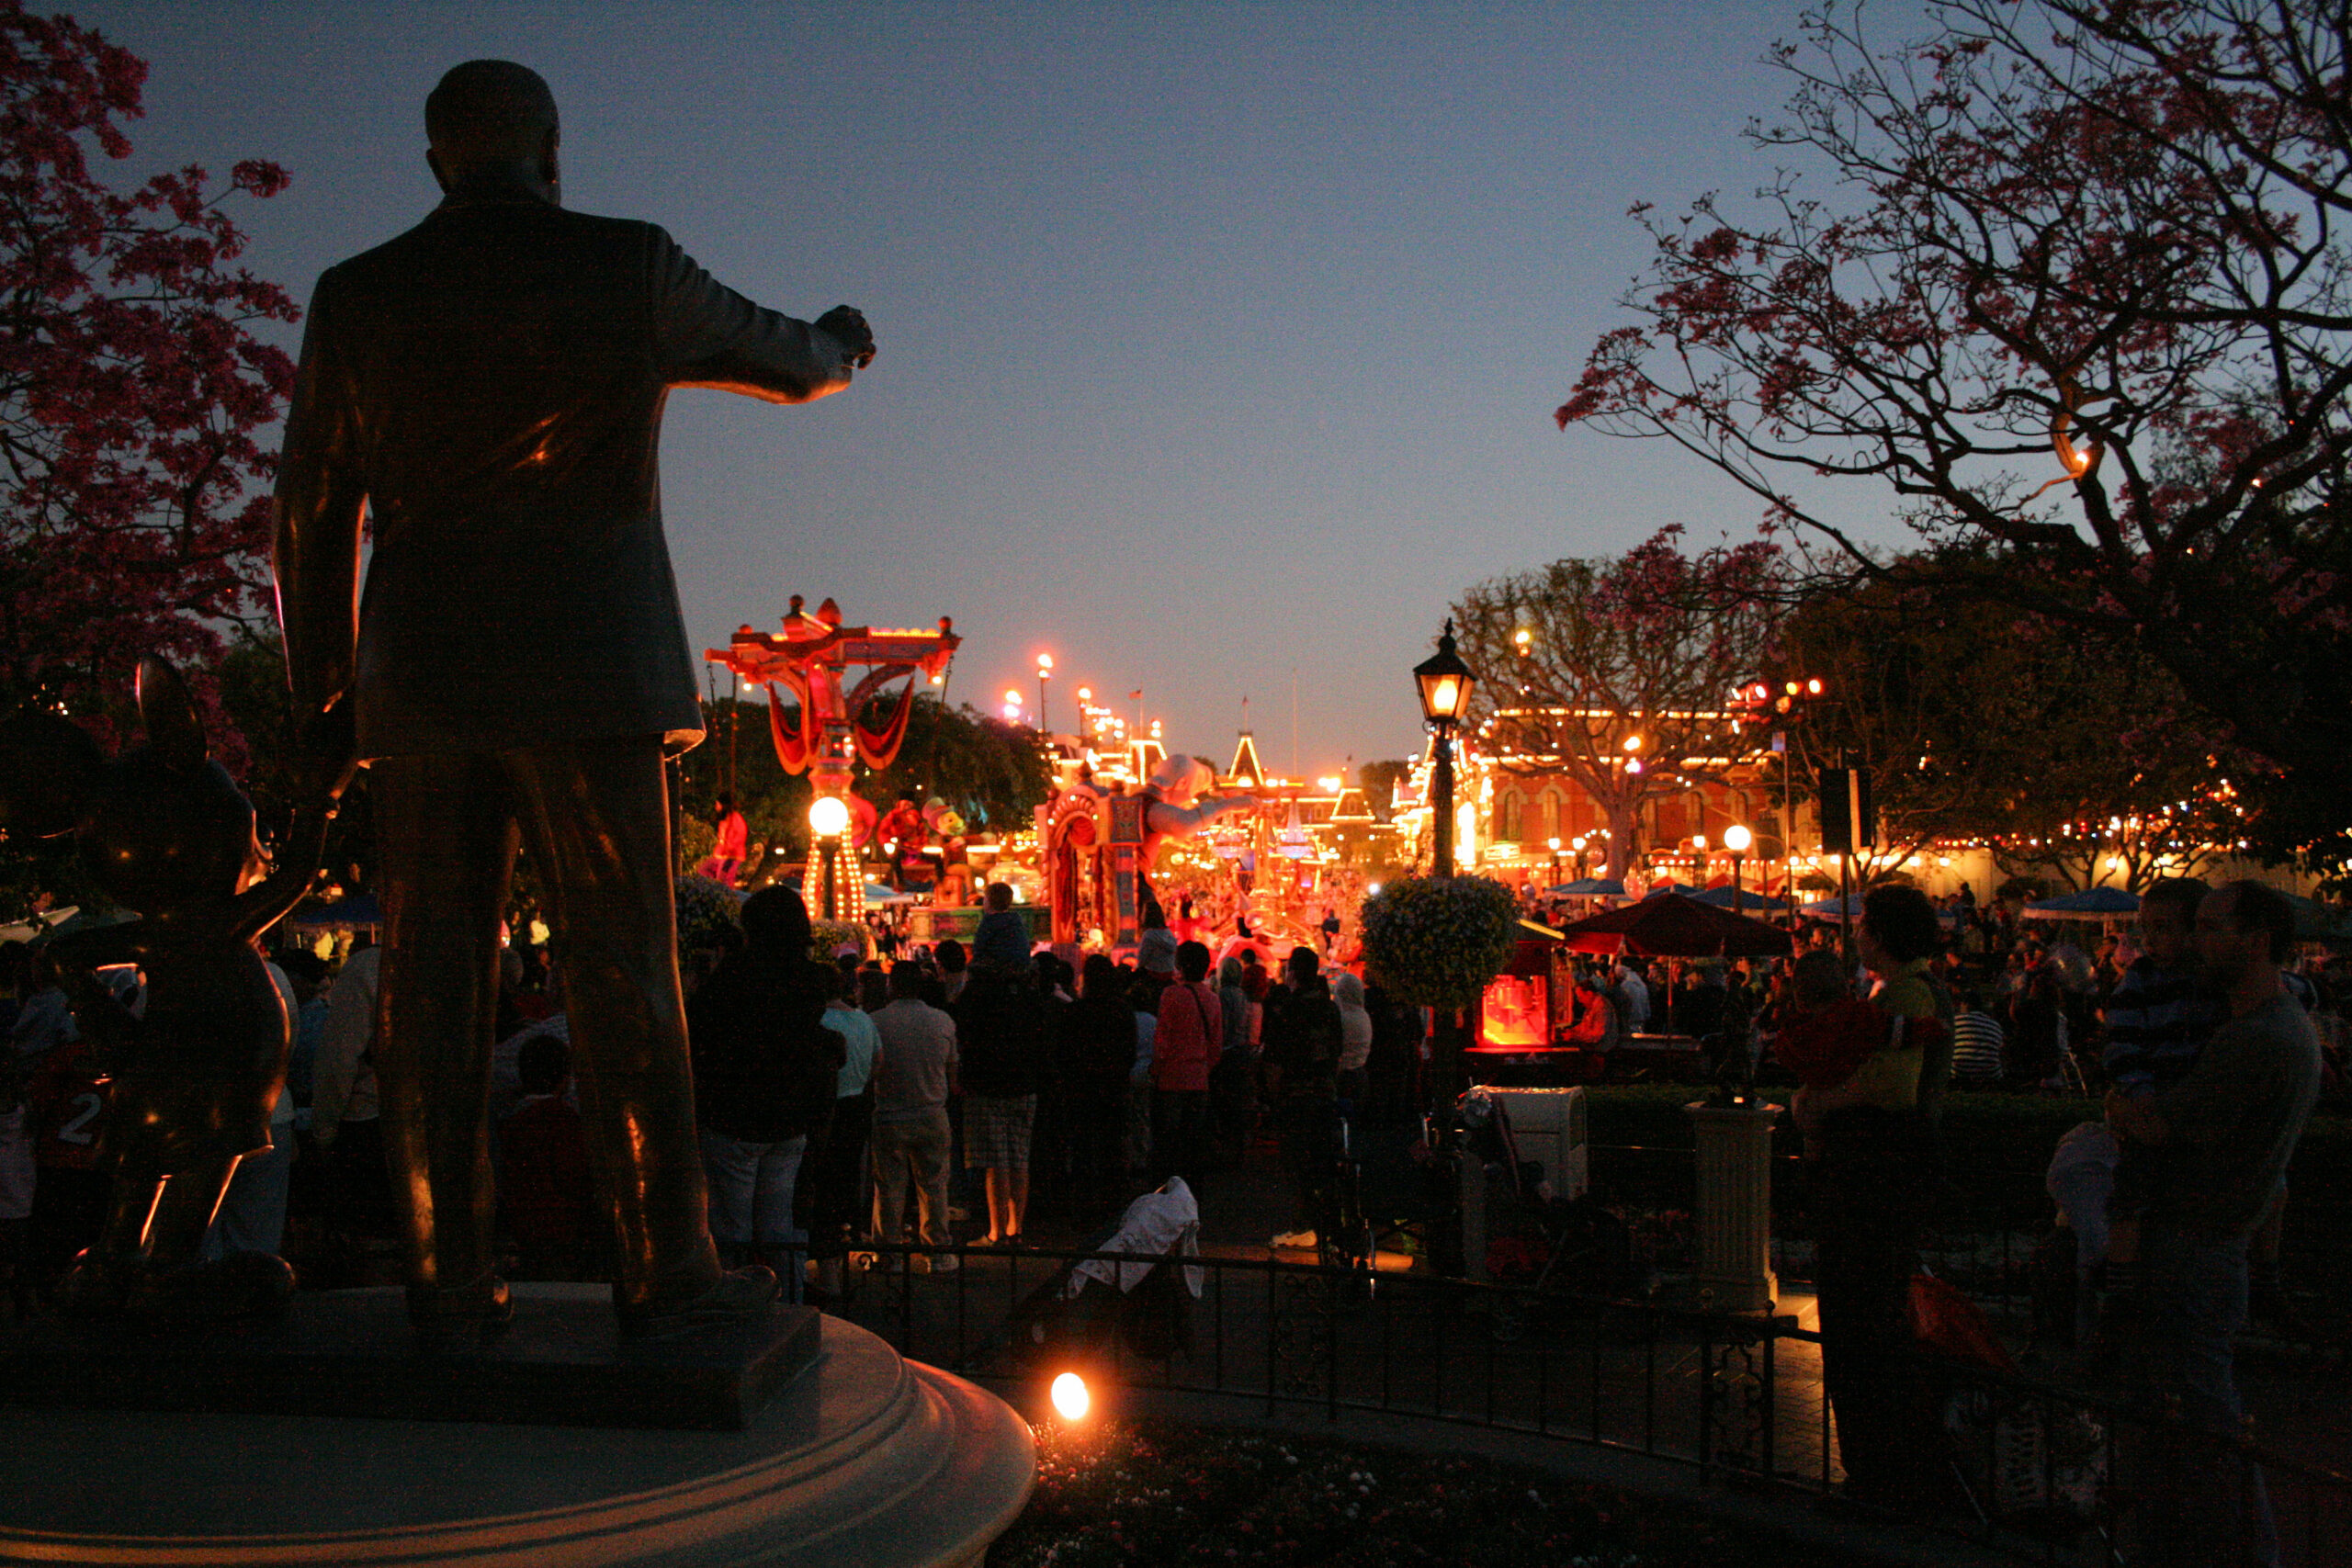 Disneyland at night as seen from behind the statue of Walt Disney and Mickey Mouse near Main Street